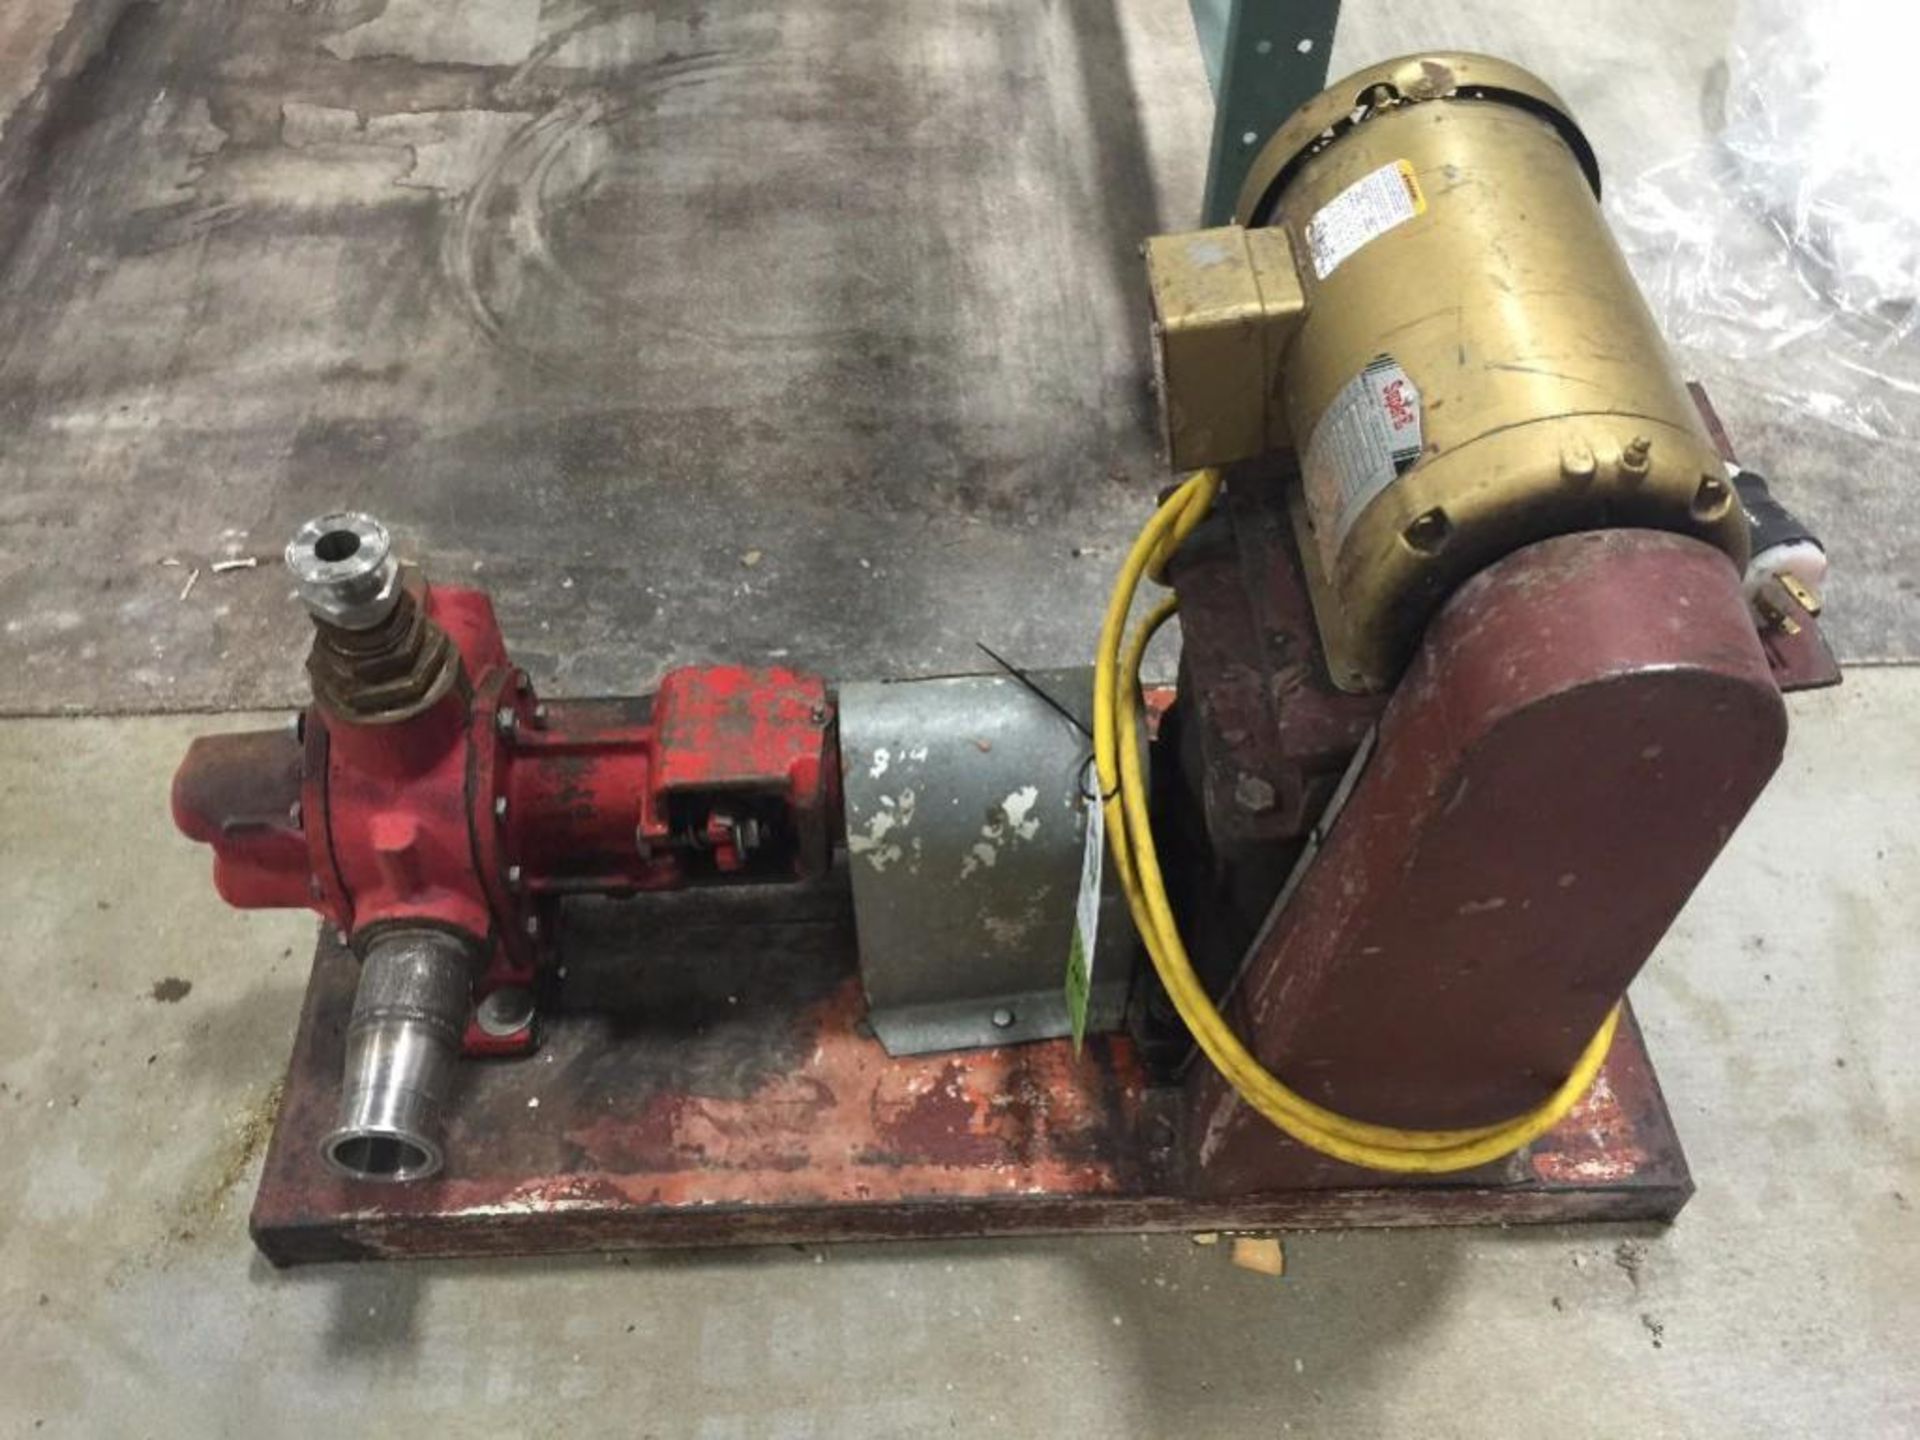 Roper pump and motor, spare motor and gearbox - Rigging Fee: $100